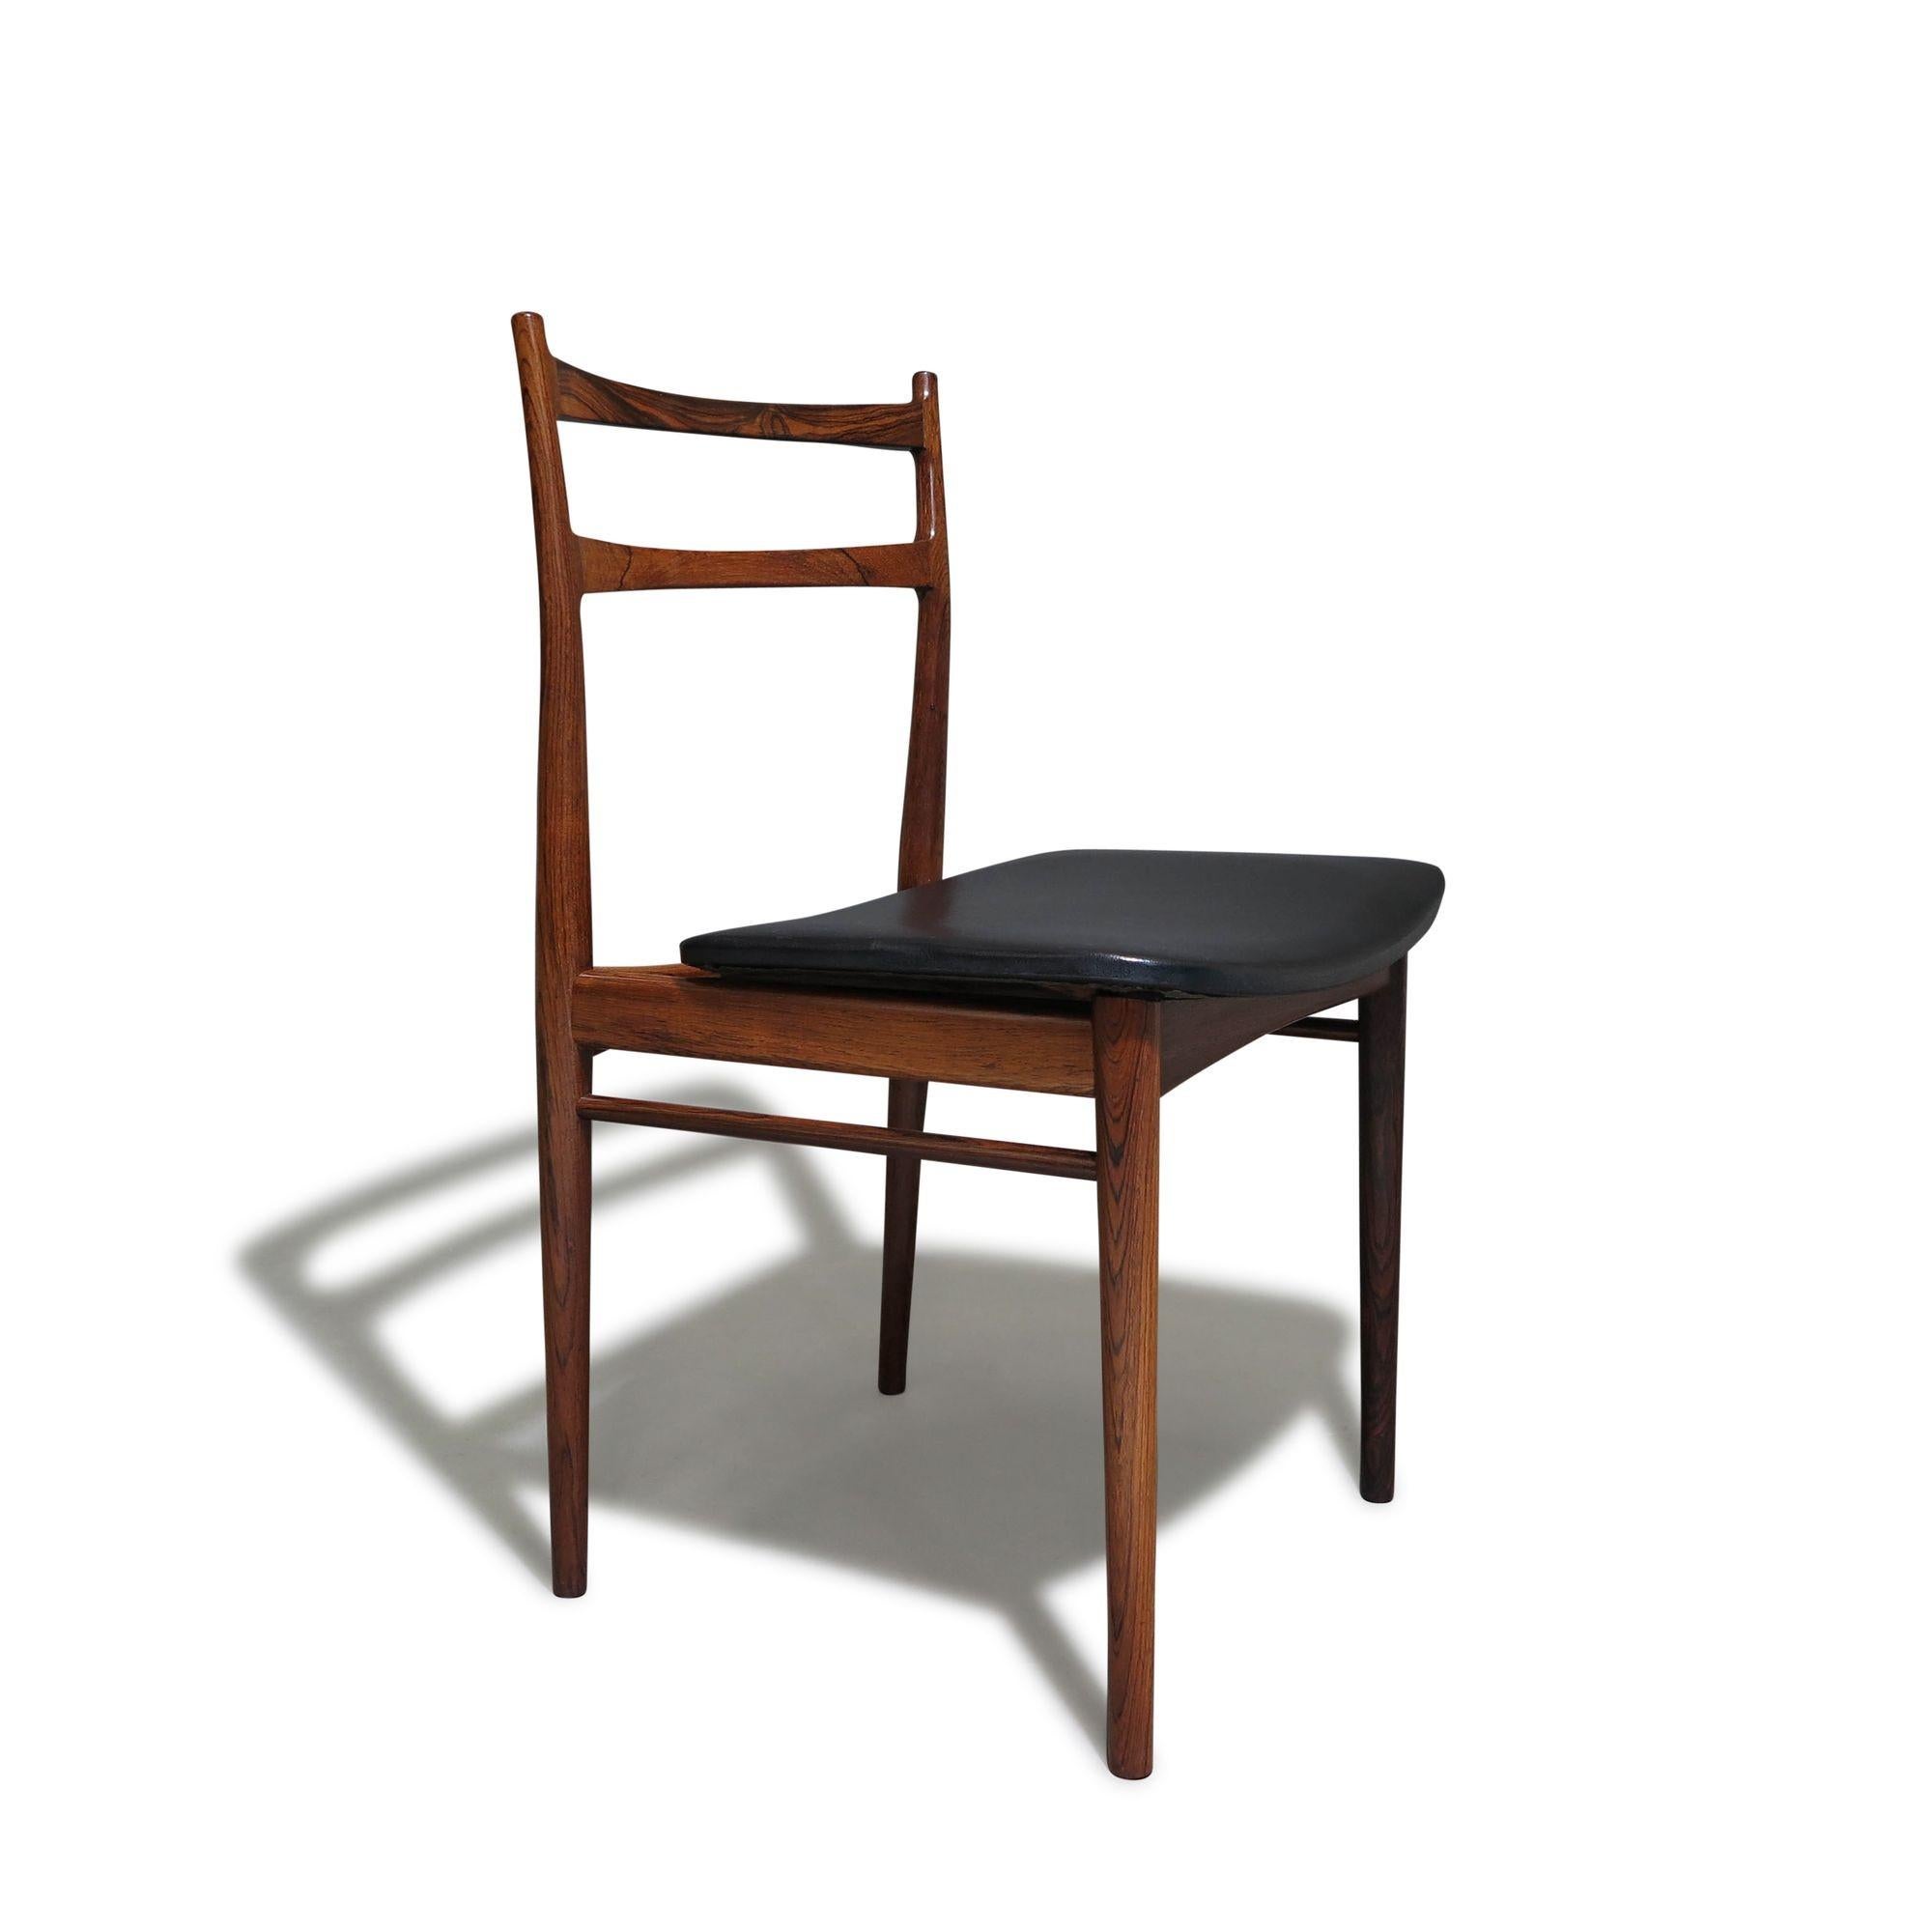 Minimal and classic form dining chairs designed by Henry Rosengren Hansen for Brande Mobelindustri, Denmark in 1958. The elegant set of six chairs feature sculpted solid Brazilian rosewood frames; lightly restored preserving the original patina and